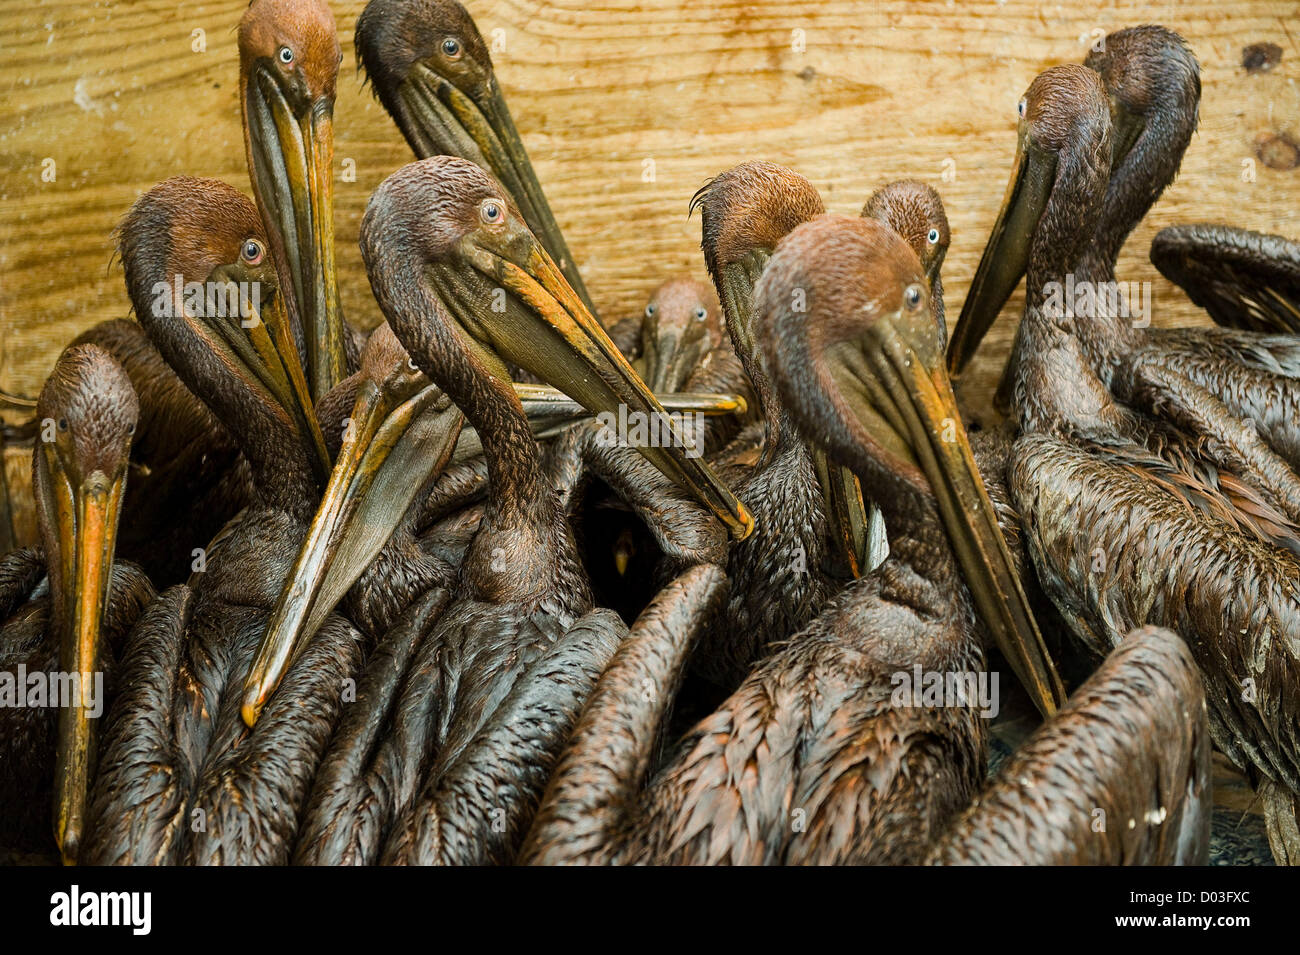 Nov. 15, 2012 - BP has agreed to plead guilty to felony charges and pay $4.5 billion in penalties for the Deepwater Horizon oil-rig accident and spill. PICTURED:  June 8, 2010 - Buras, Louisiana, U.S. - Oil stained brown pelicans wait in a holding box to be cleaned at an animal rescue facility in Fort Jackson. Oil from the Deepwater Horizon oil spill continues to wash a shore along the Gulf of Mexico all the way to Florida. Over the past six weeks the rescue facility has helped hundred of oil coated birds. (Credit Image: © Robin Loznak/ZUMApress.com) Stock Photo